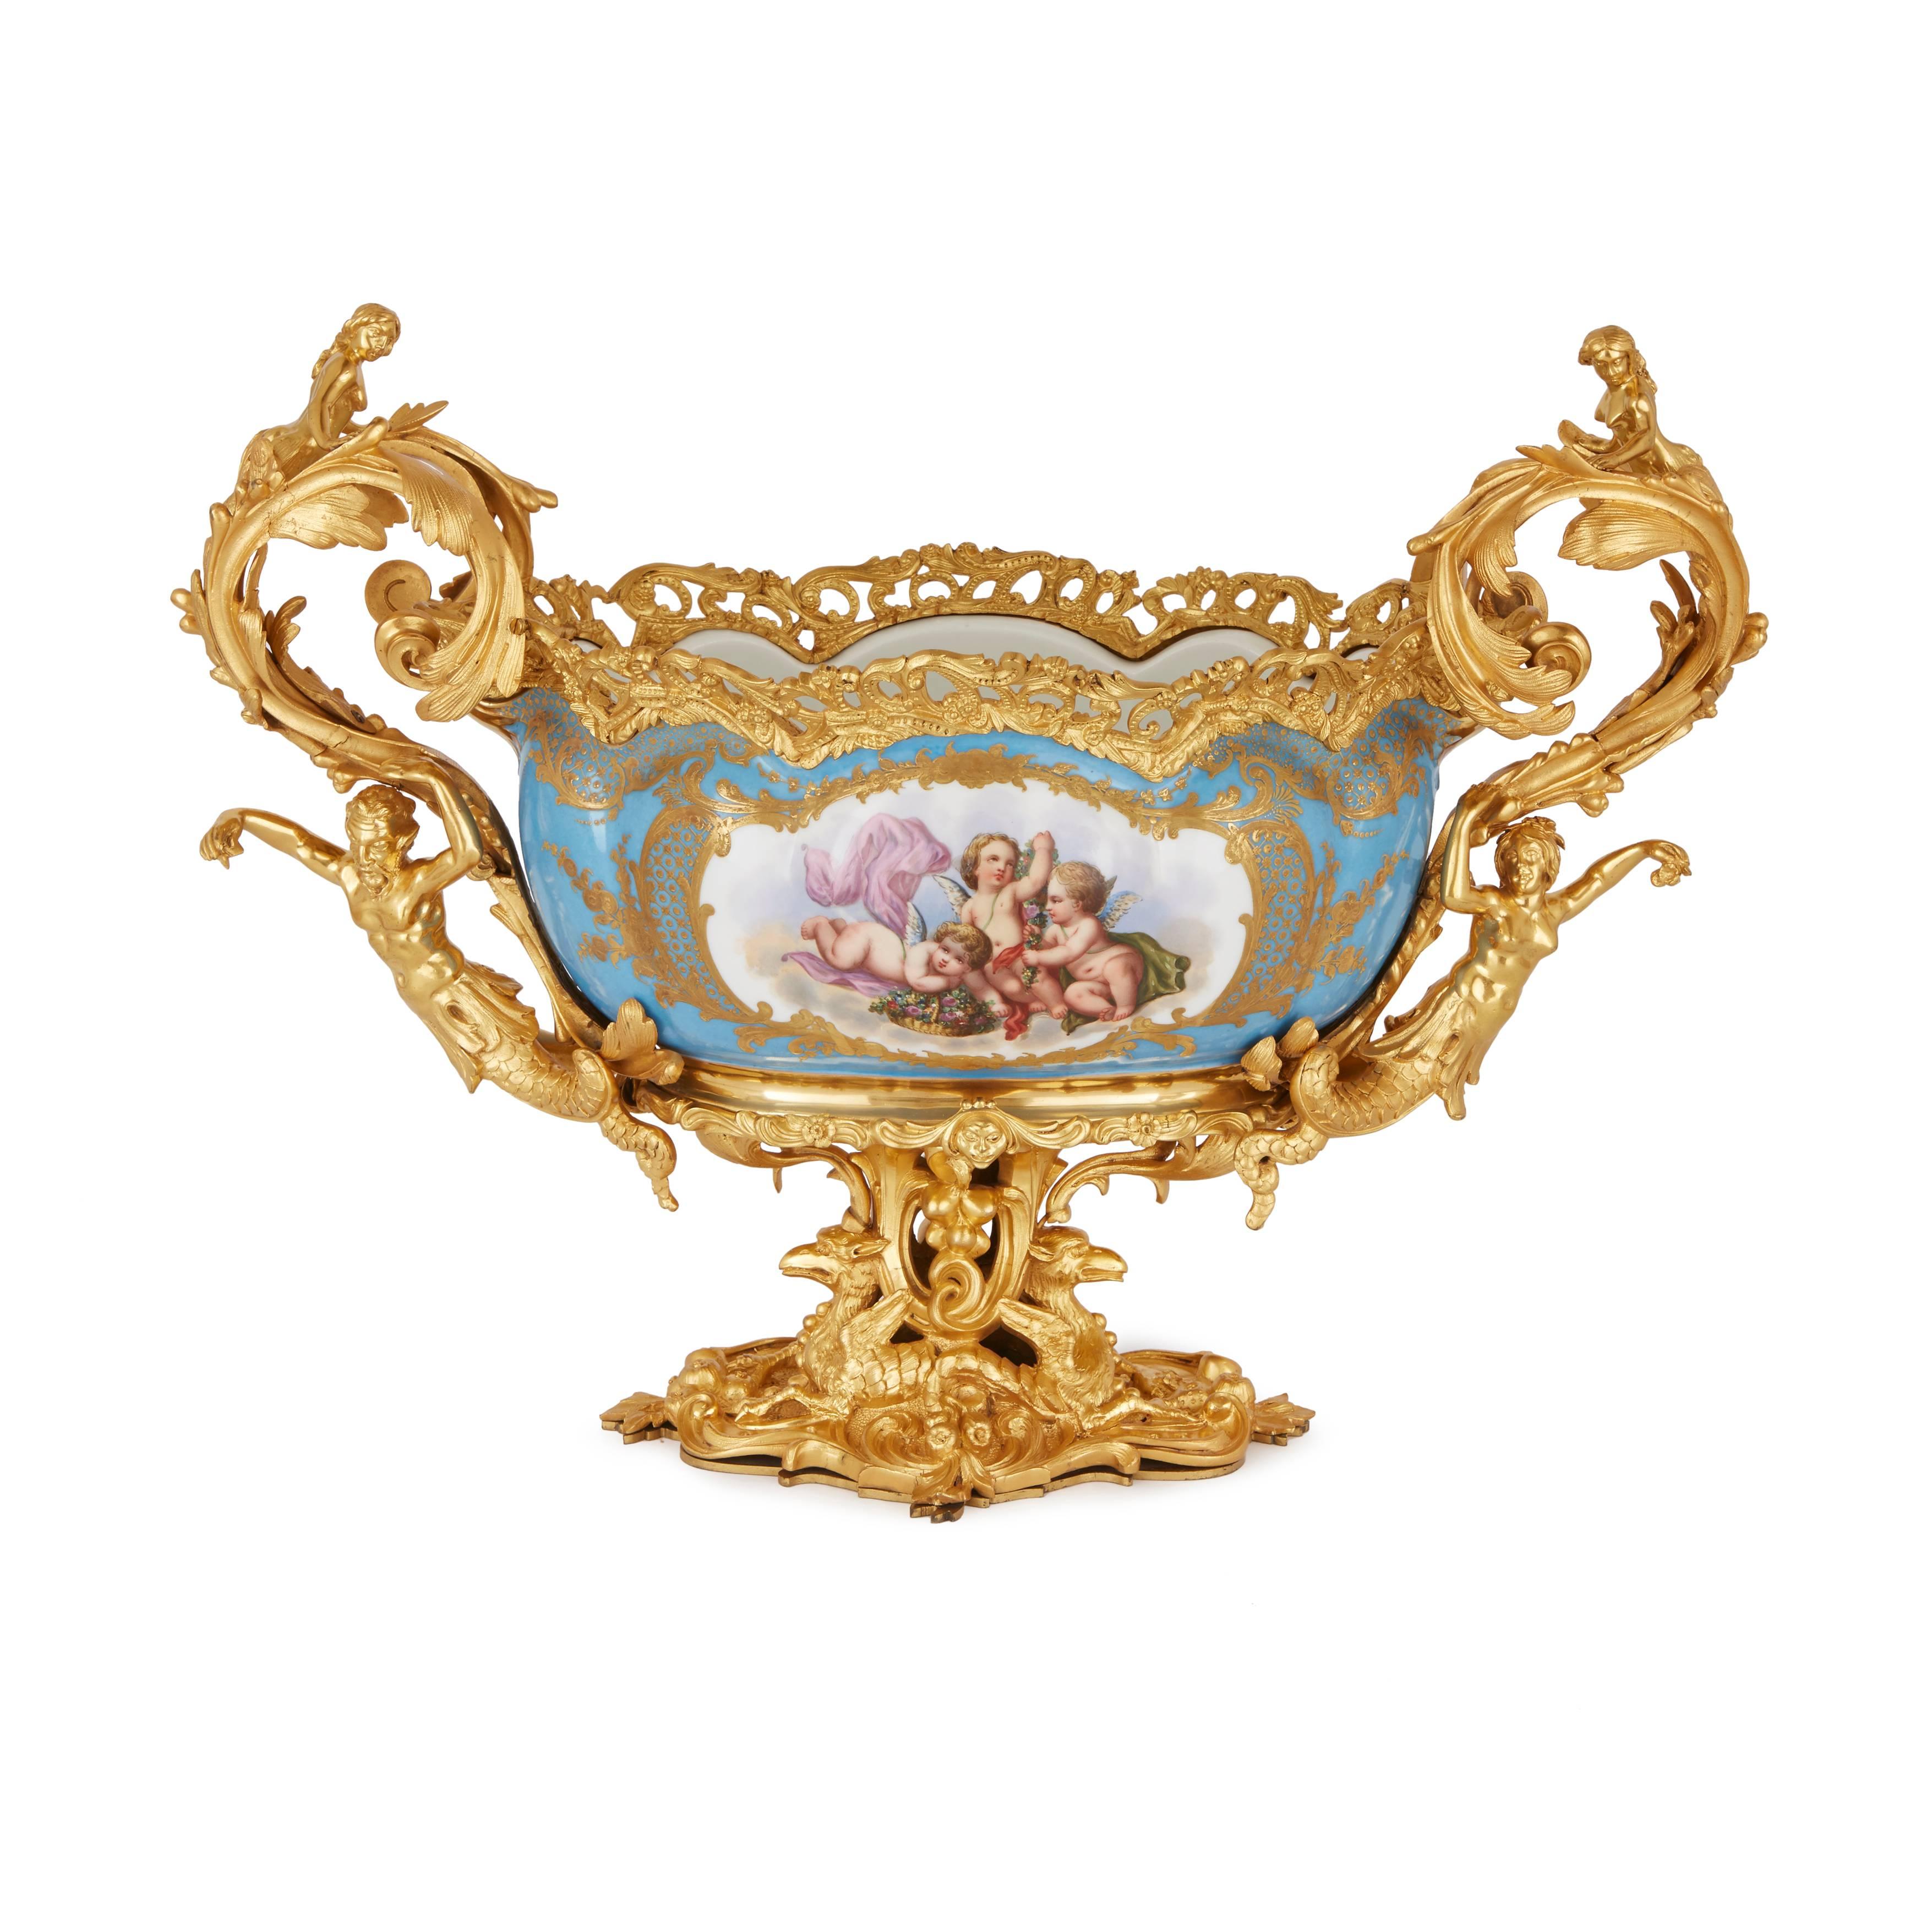 The body parcel-gilt on light blue ground and finely painted with cherubs, the acanthus leaves twin handles supported by sirens, resting on an ormolu base decorated with griffins.